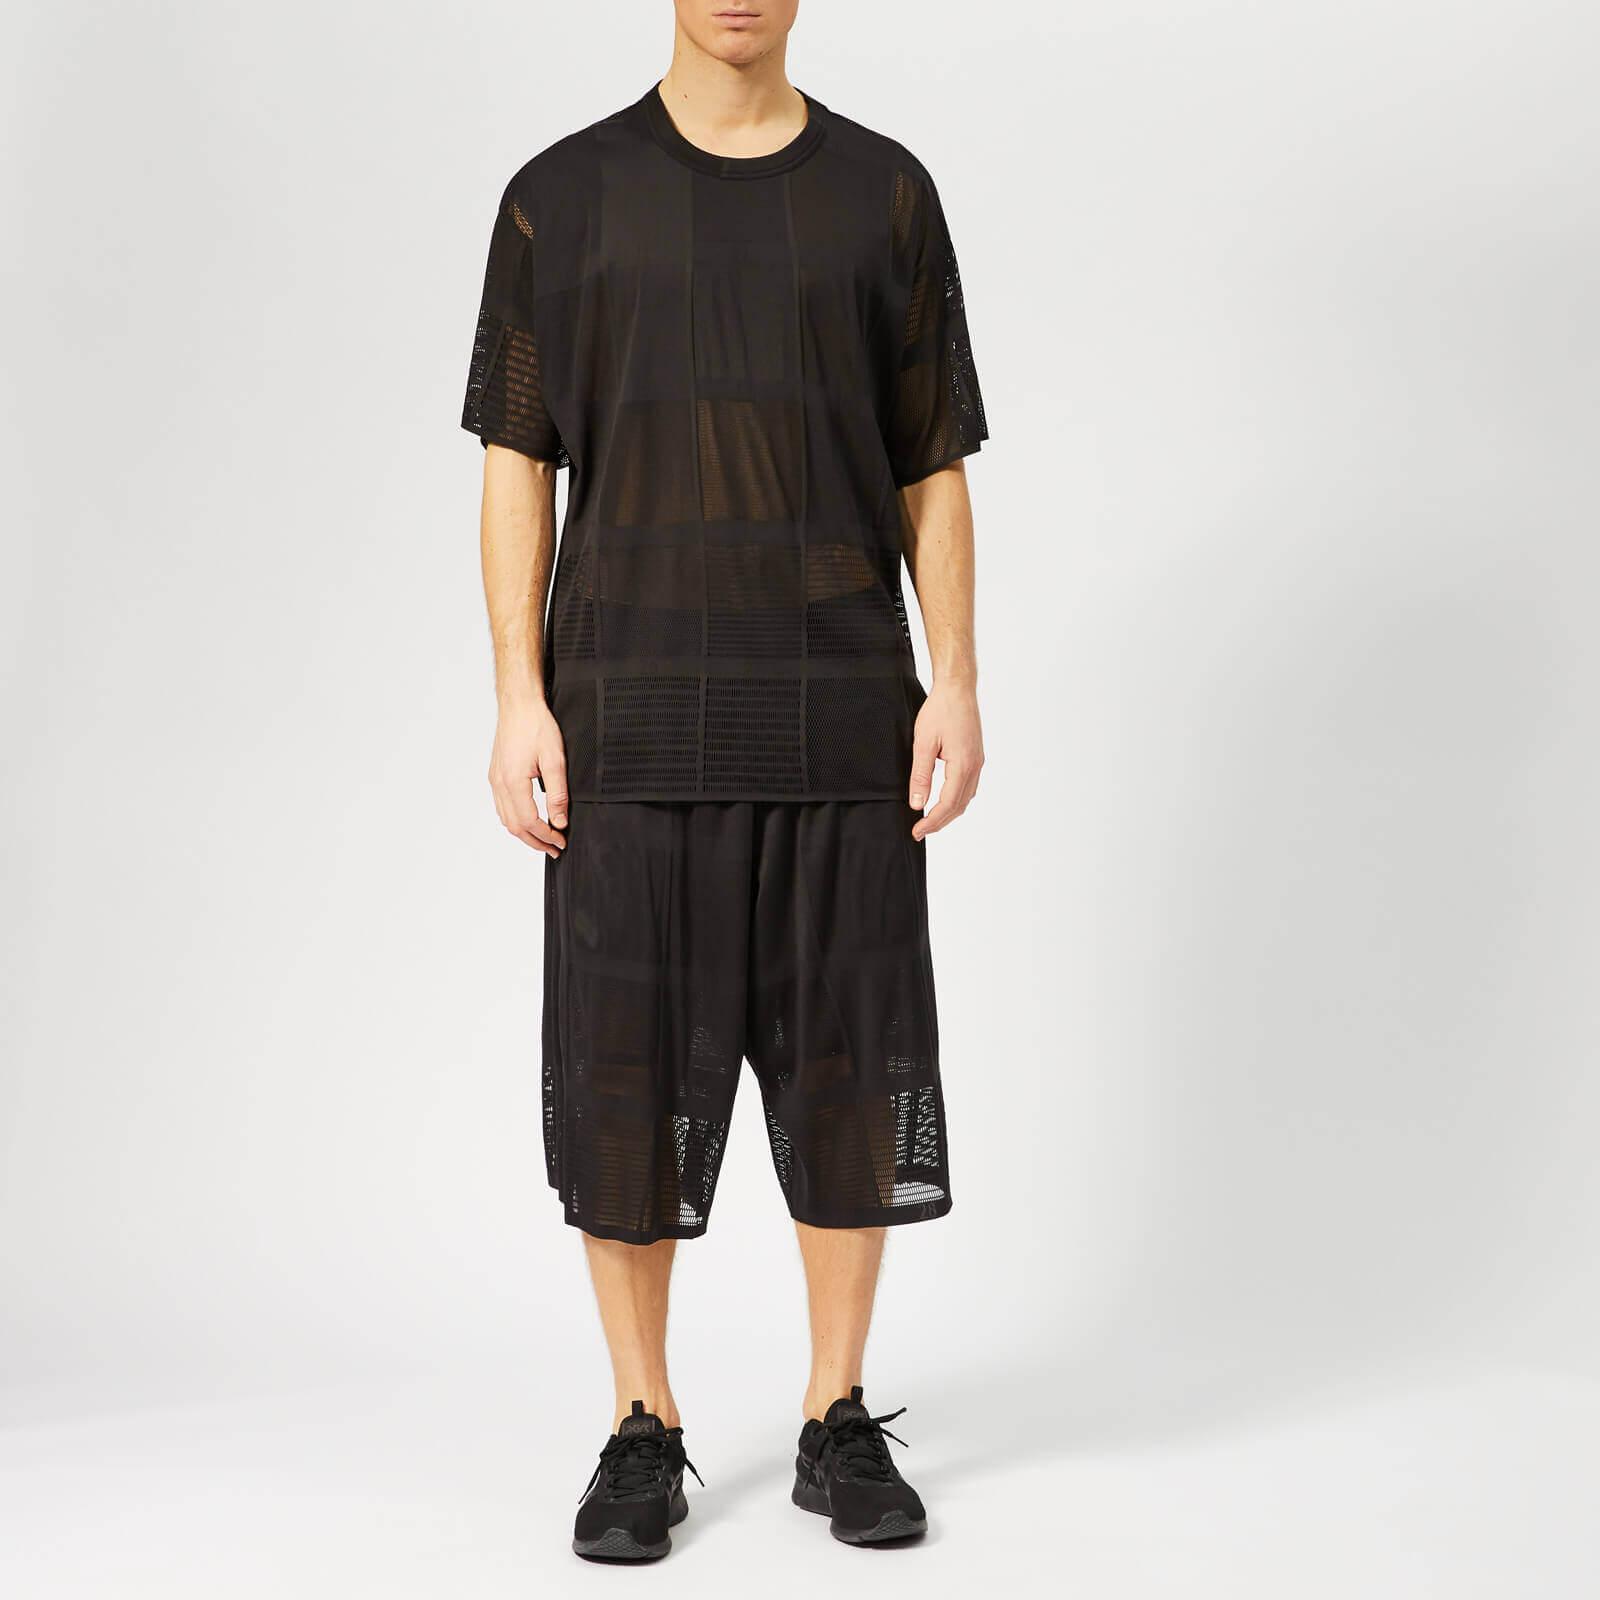 Y-3 Synthetic Patchwork Mesh Short Sleeve T-shirt in Black for Men - Lyst